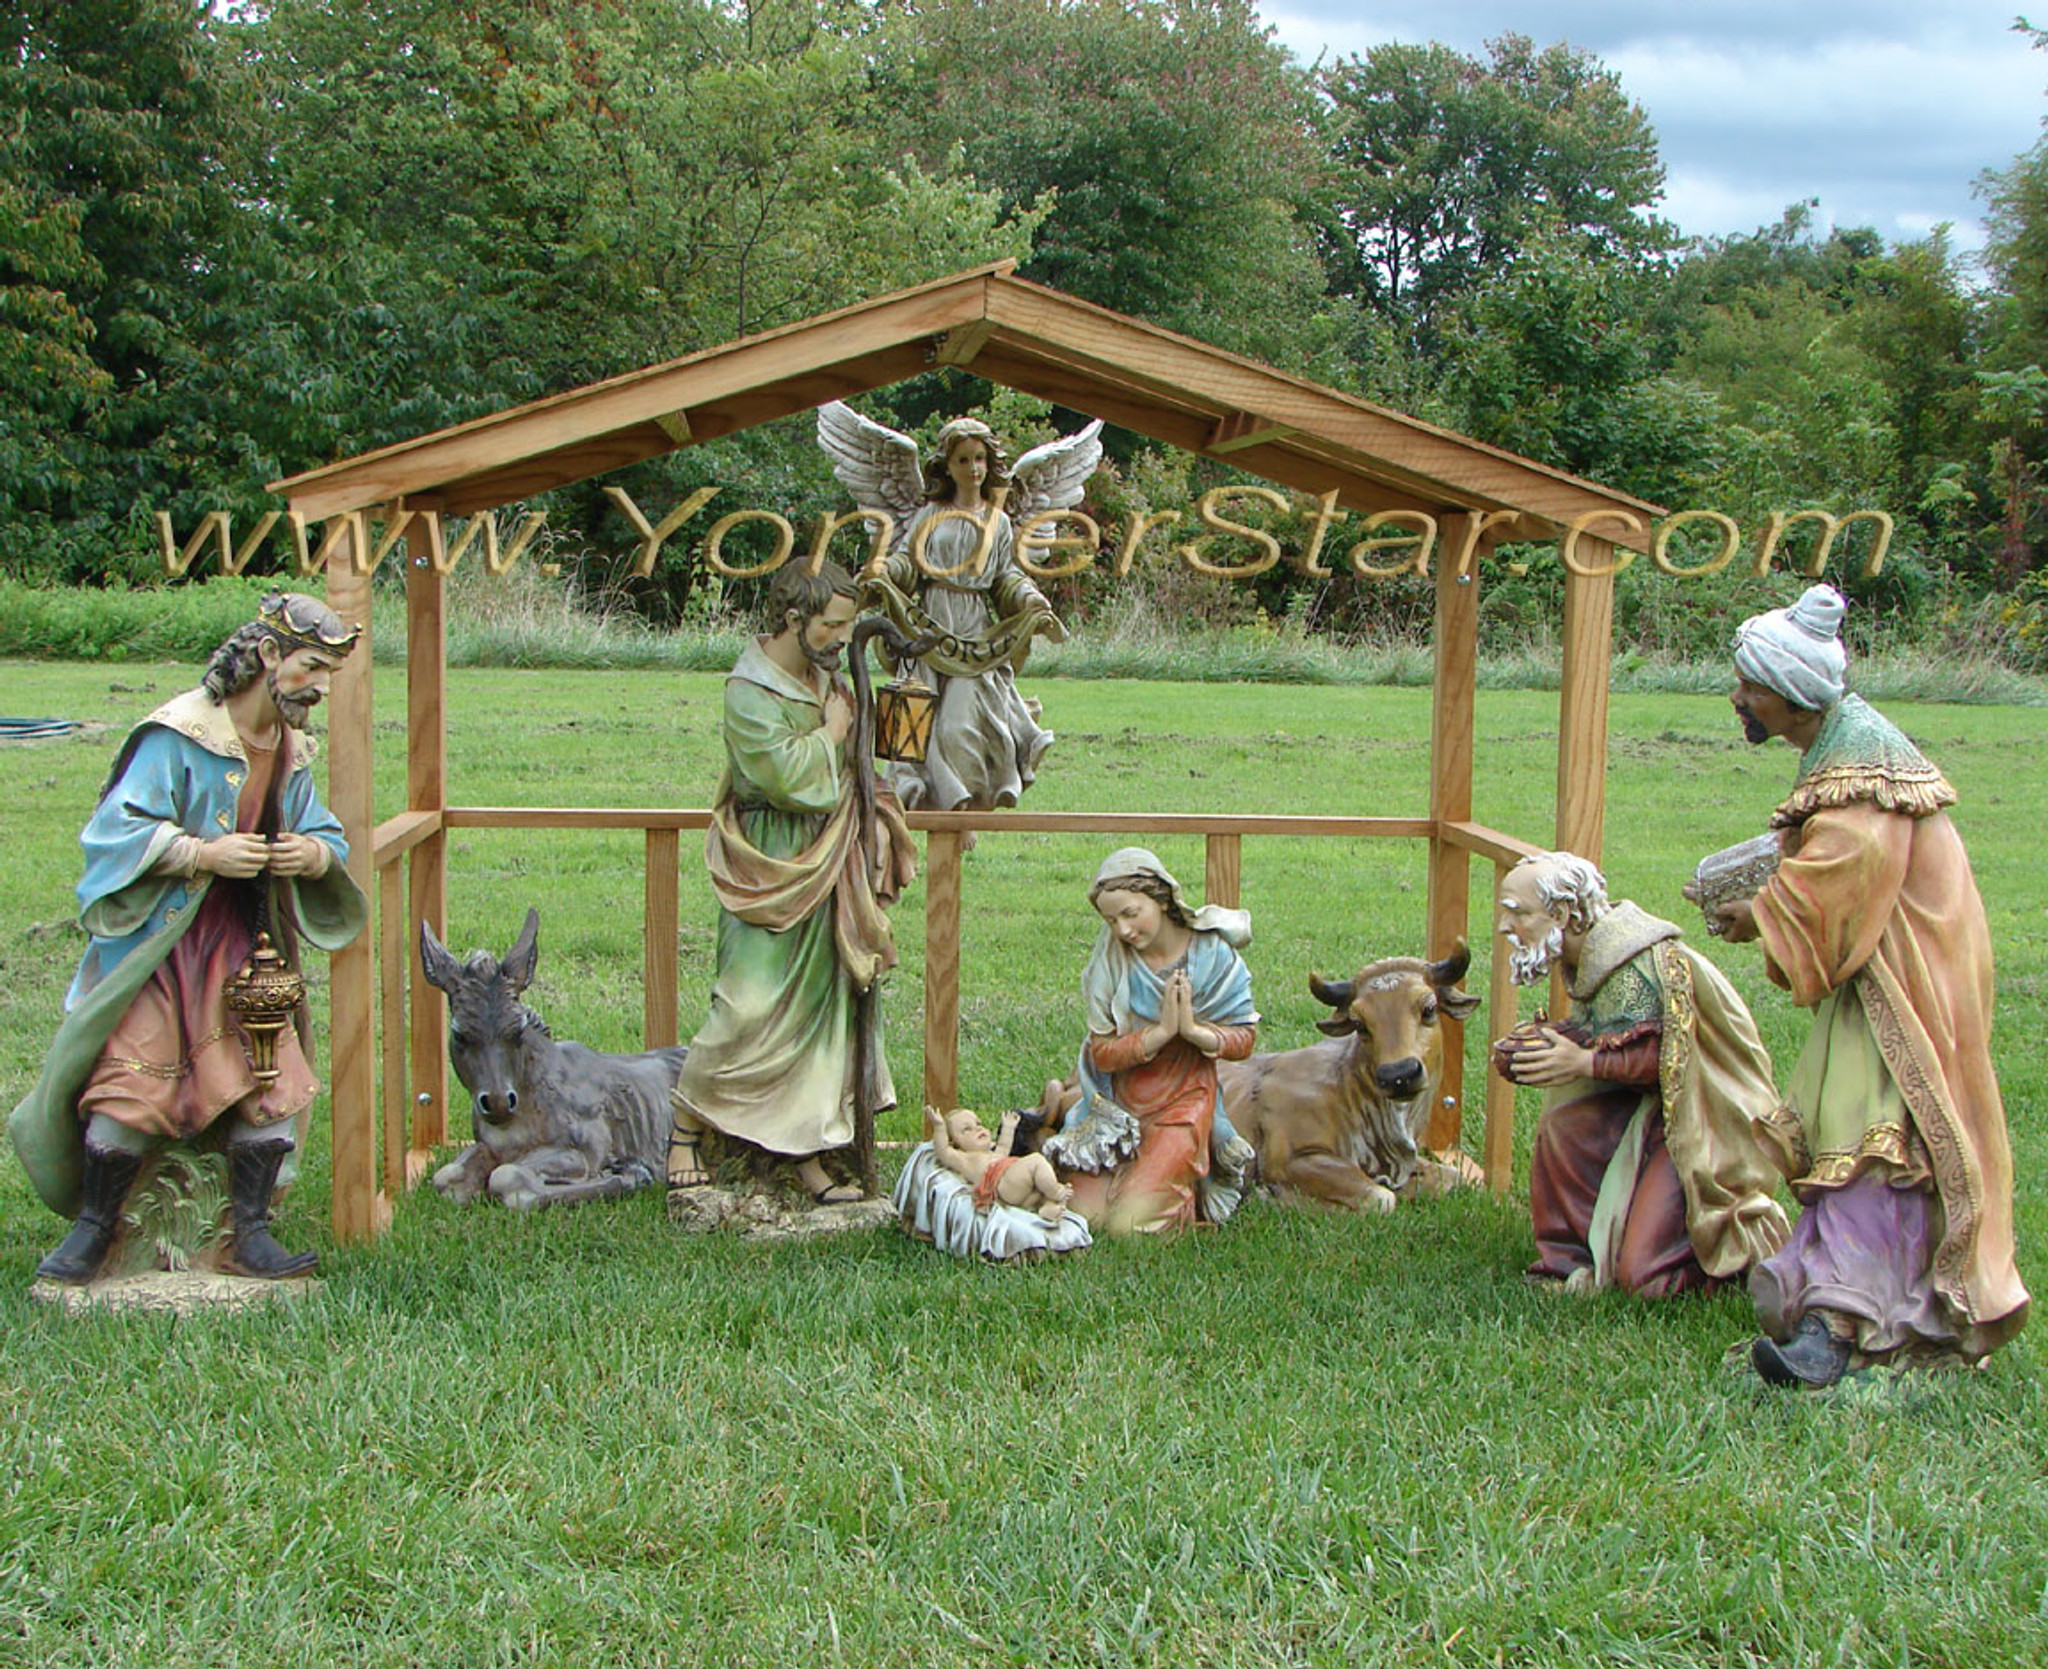 Outdoor Nativity Scene with Wooden Stable - Yonder Star Christmas Shop LLC